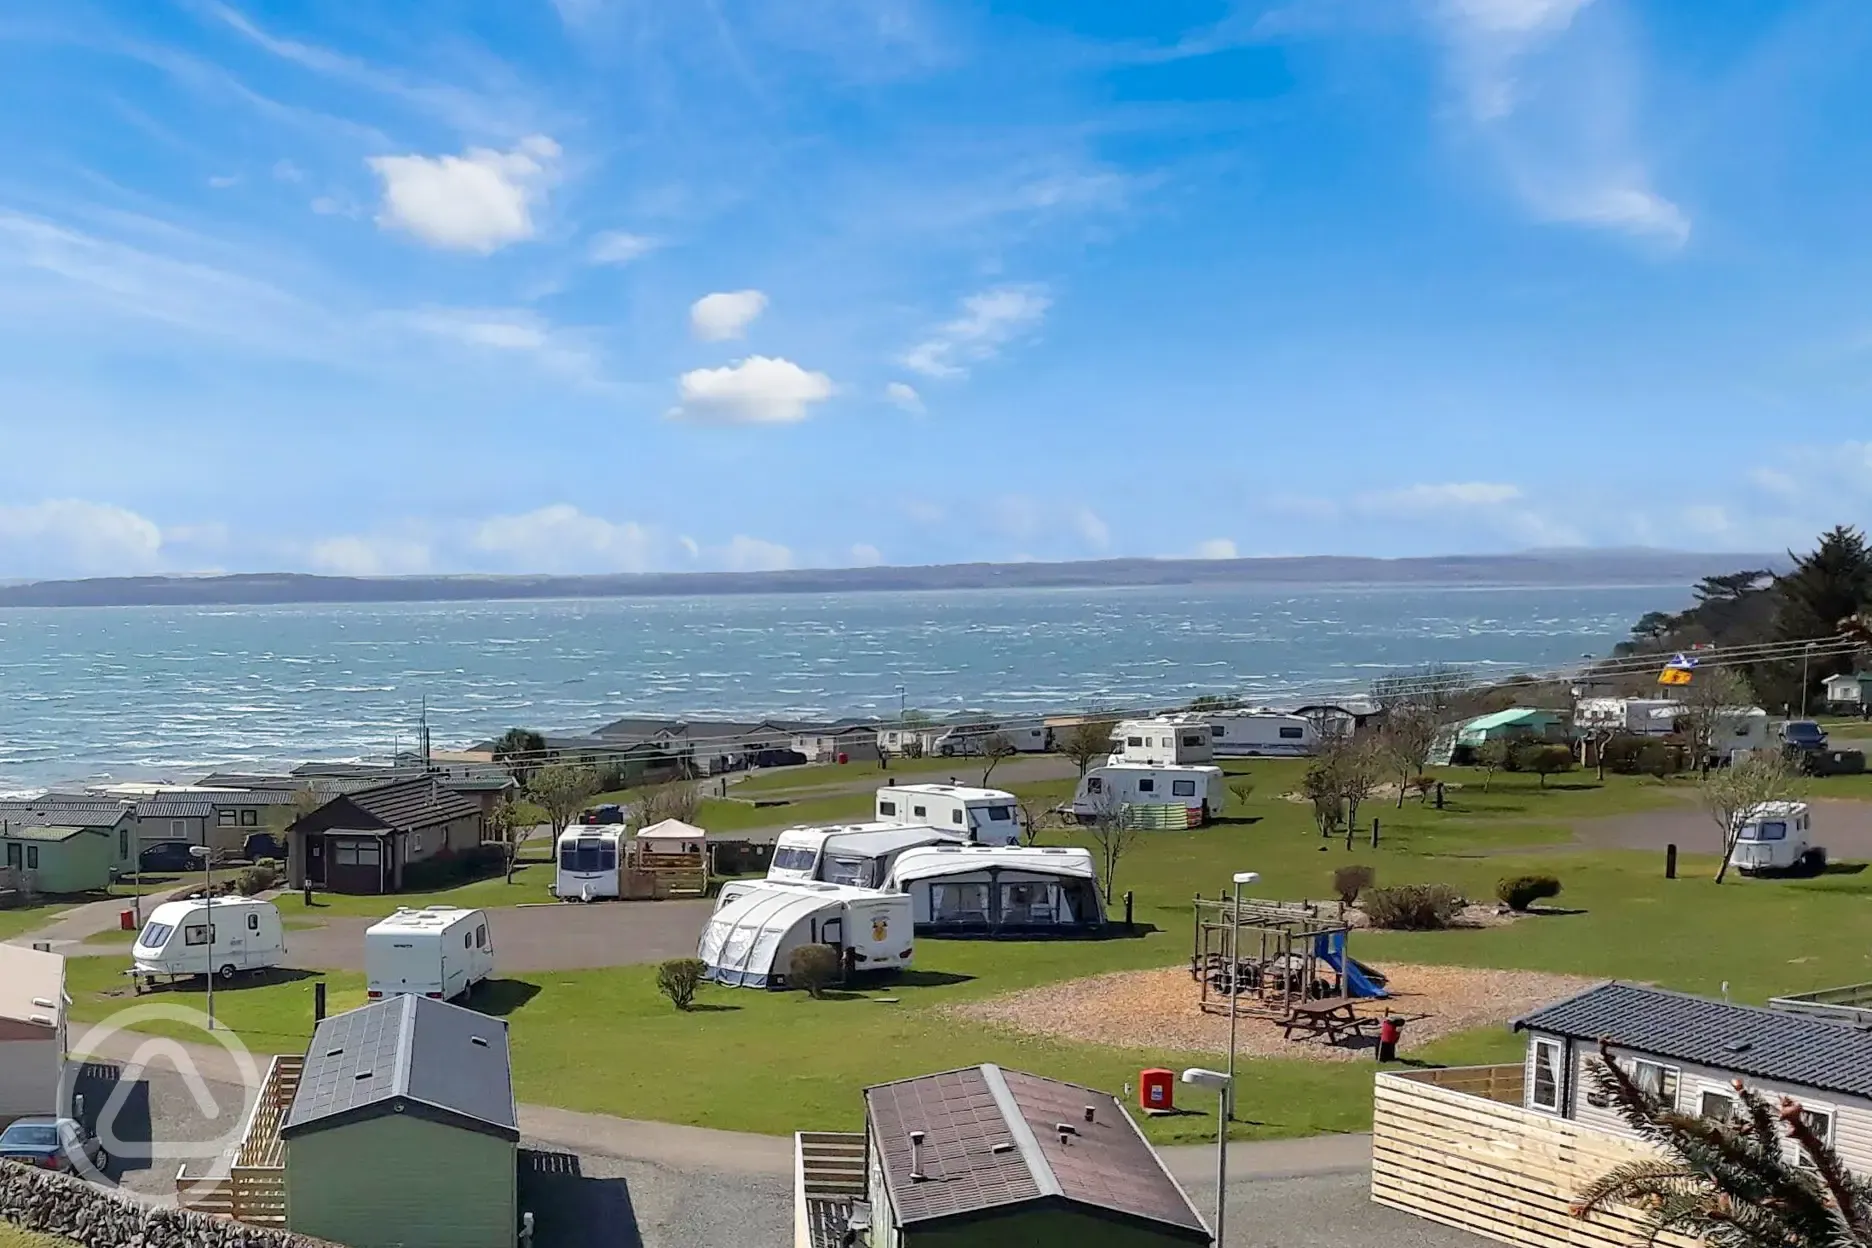 Serviced hardstanding touring pitches with sea view